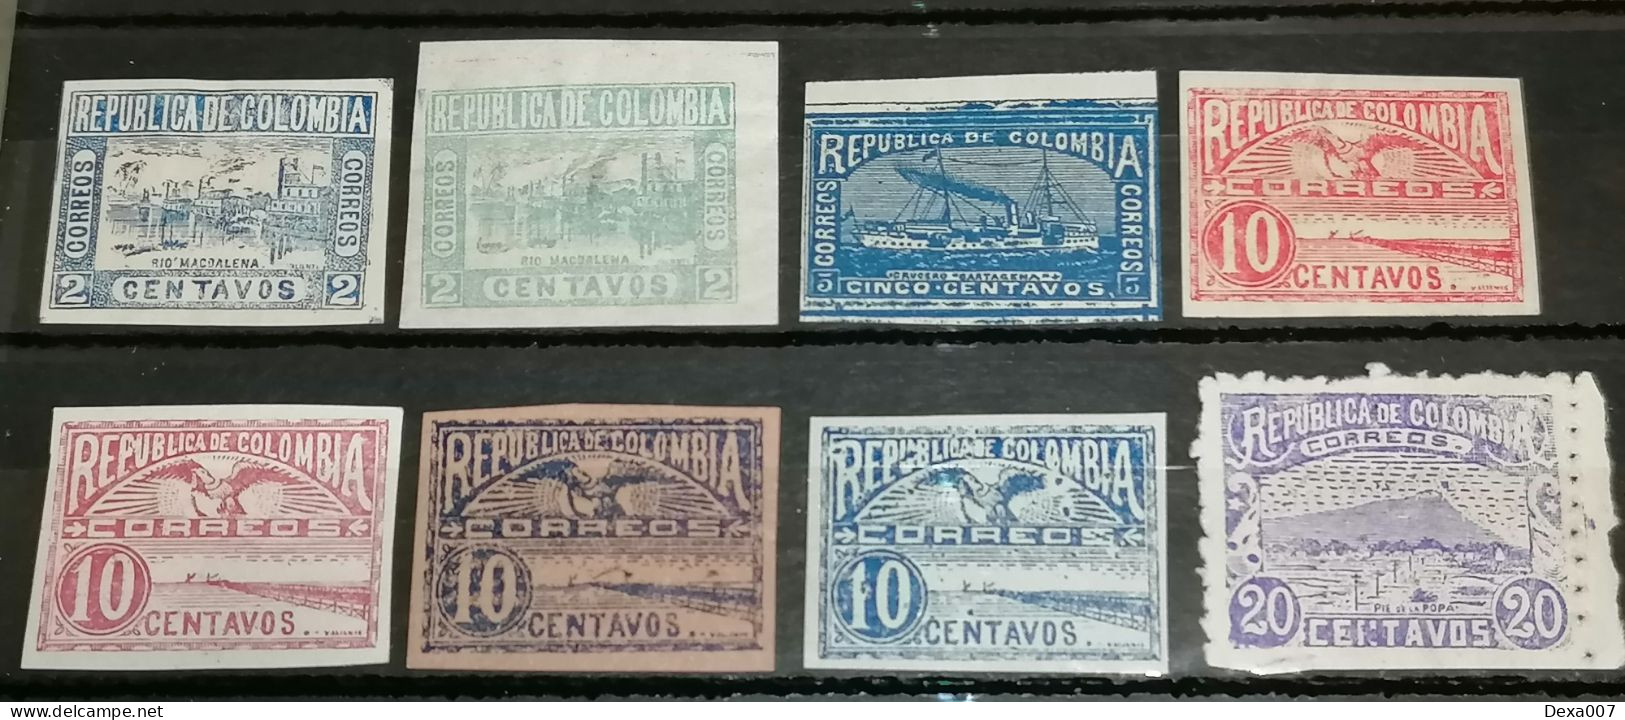 Colombia 1902 Urban View Set MH - Colombia